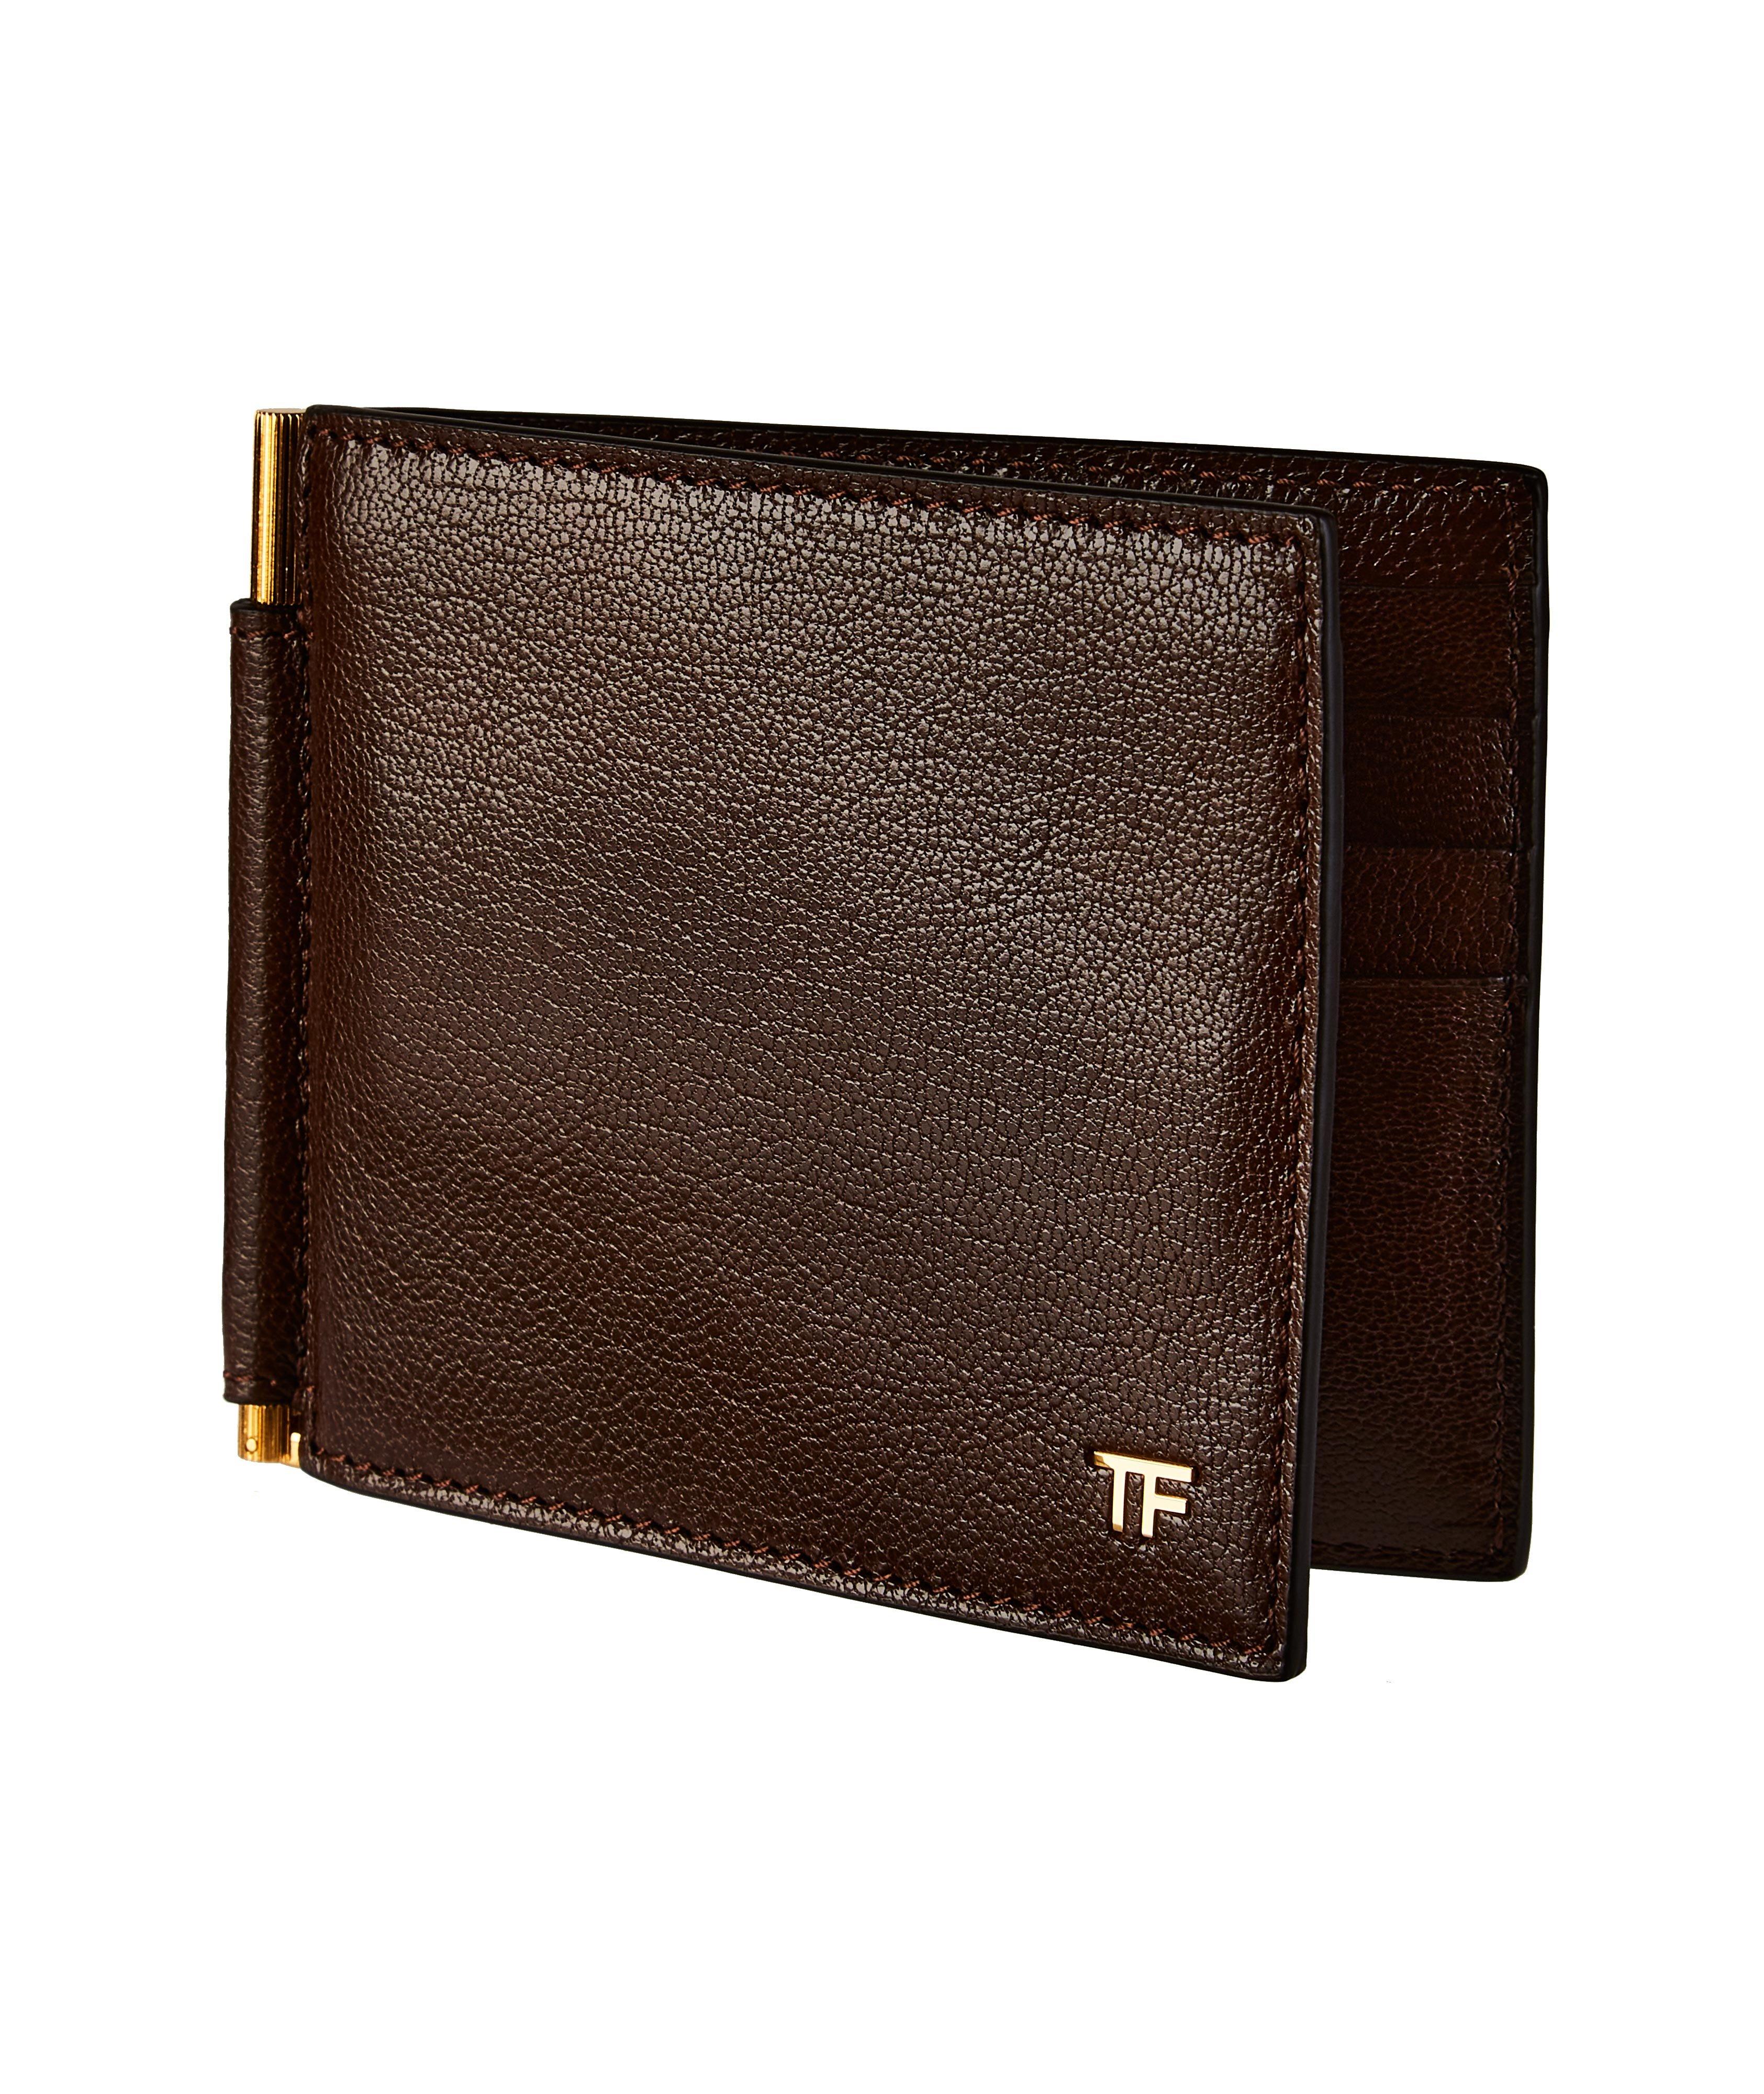 Leather Money Clip Wallet image 0